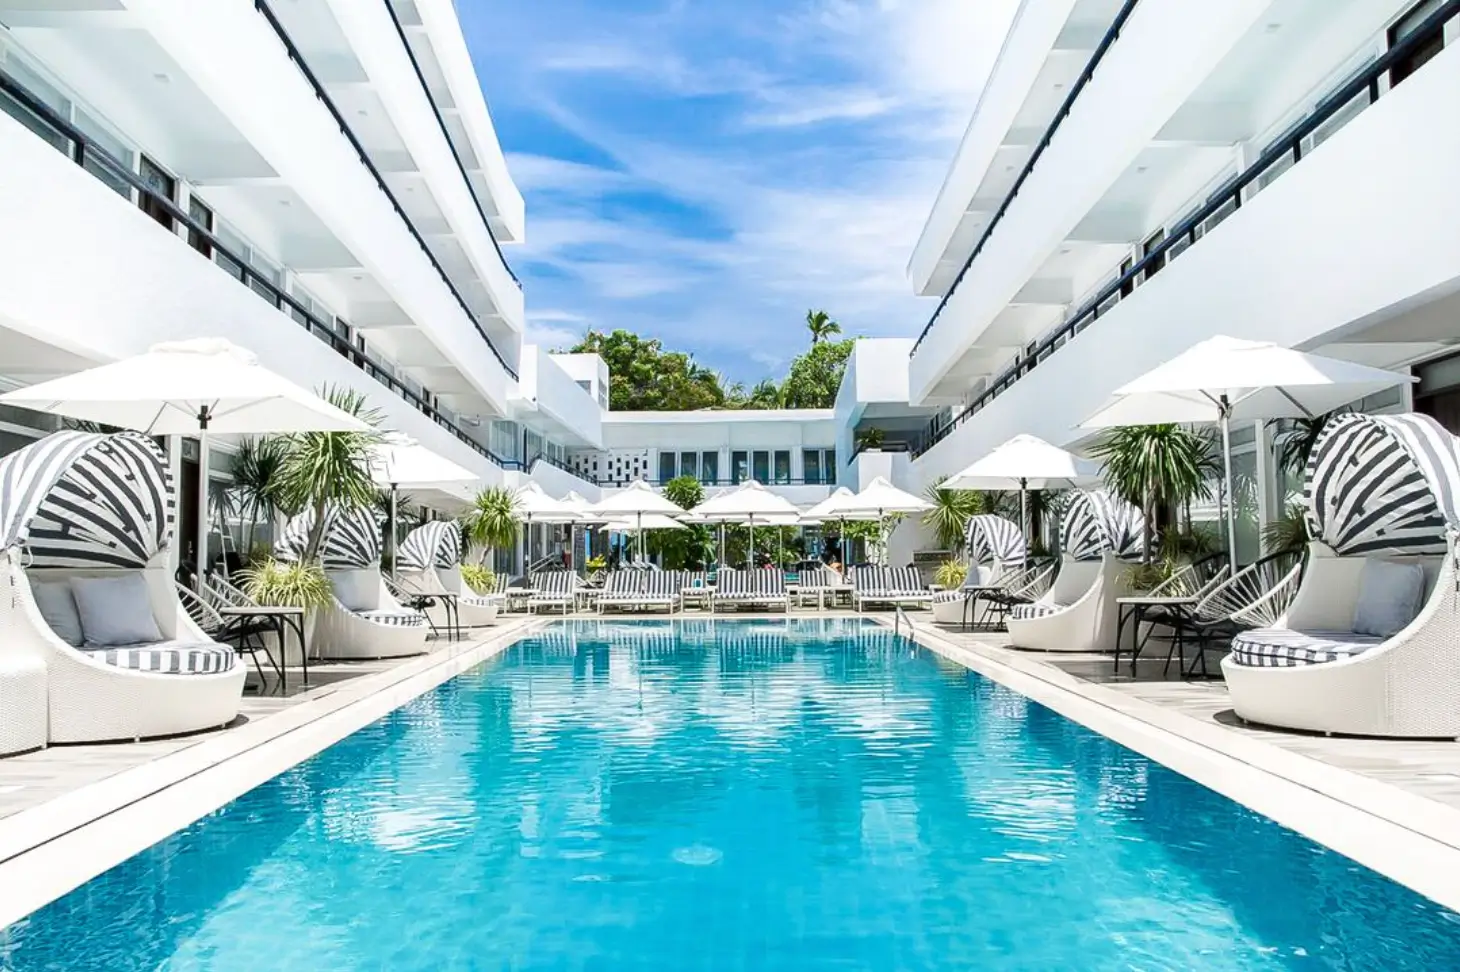 Elegant pool area at Coast Boracay, lined with stylish cabanas and sun loungers under white umbrellas. The white, modern architecture of the hotel surrounds the pool, enhancing the luxurious tropical atmosphere.